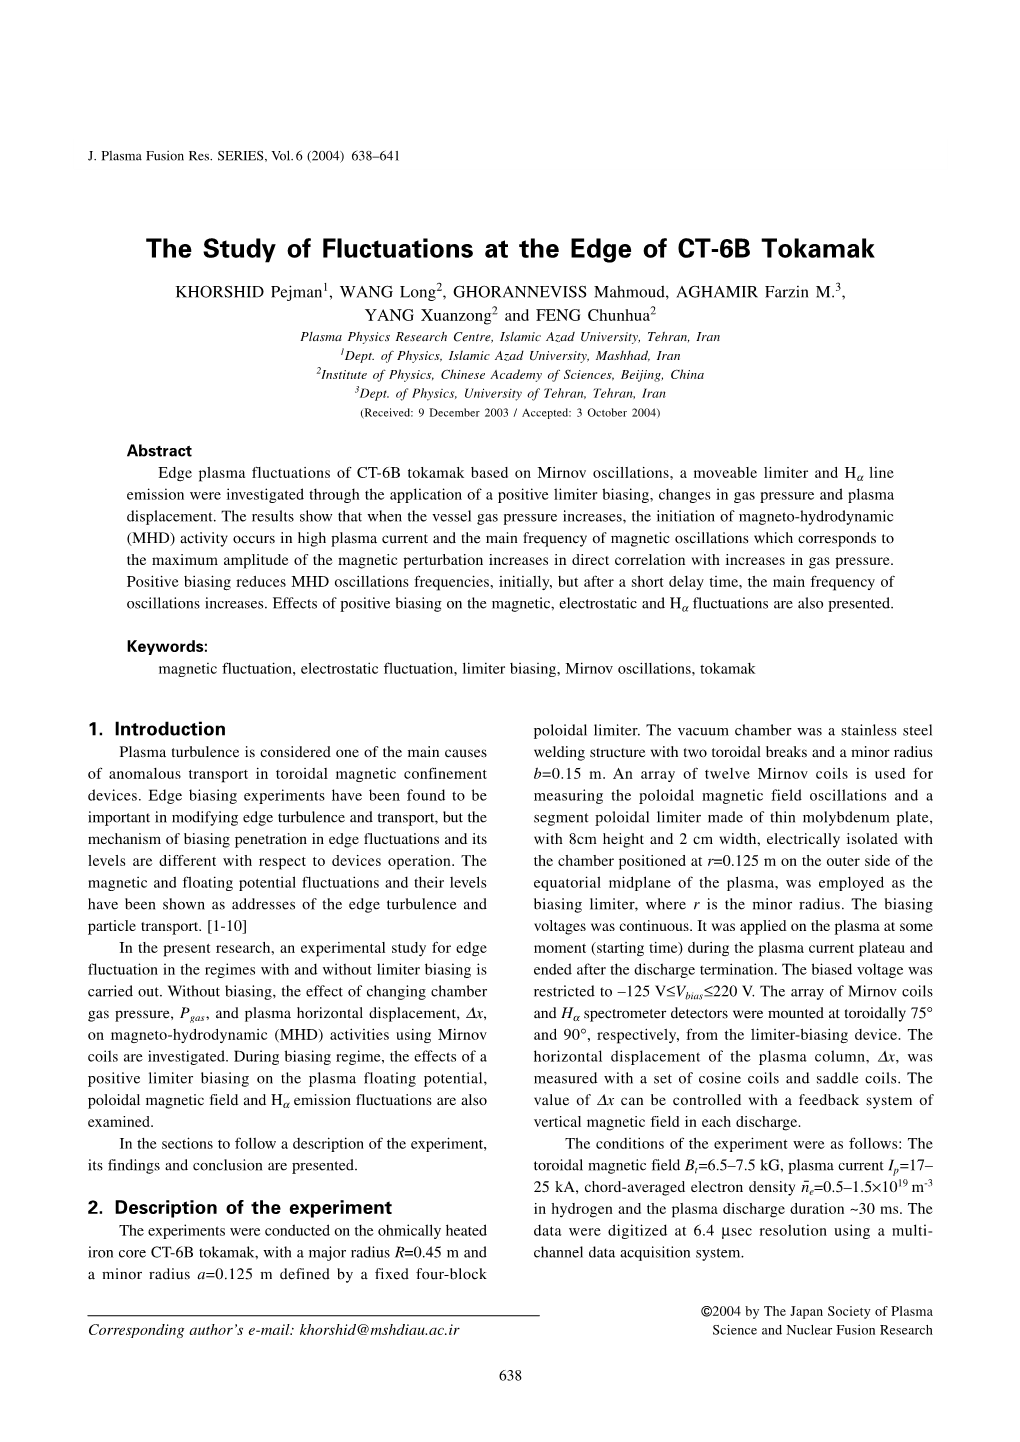 The Study of Fluctuations at the Edge of CT-6B Tokamak